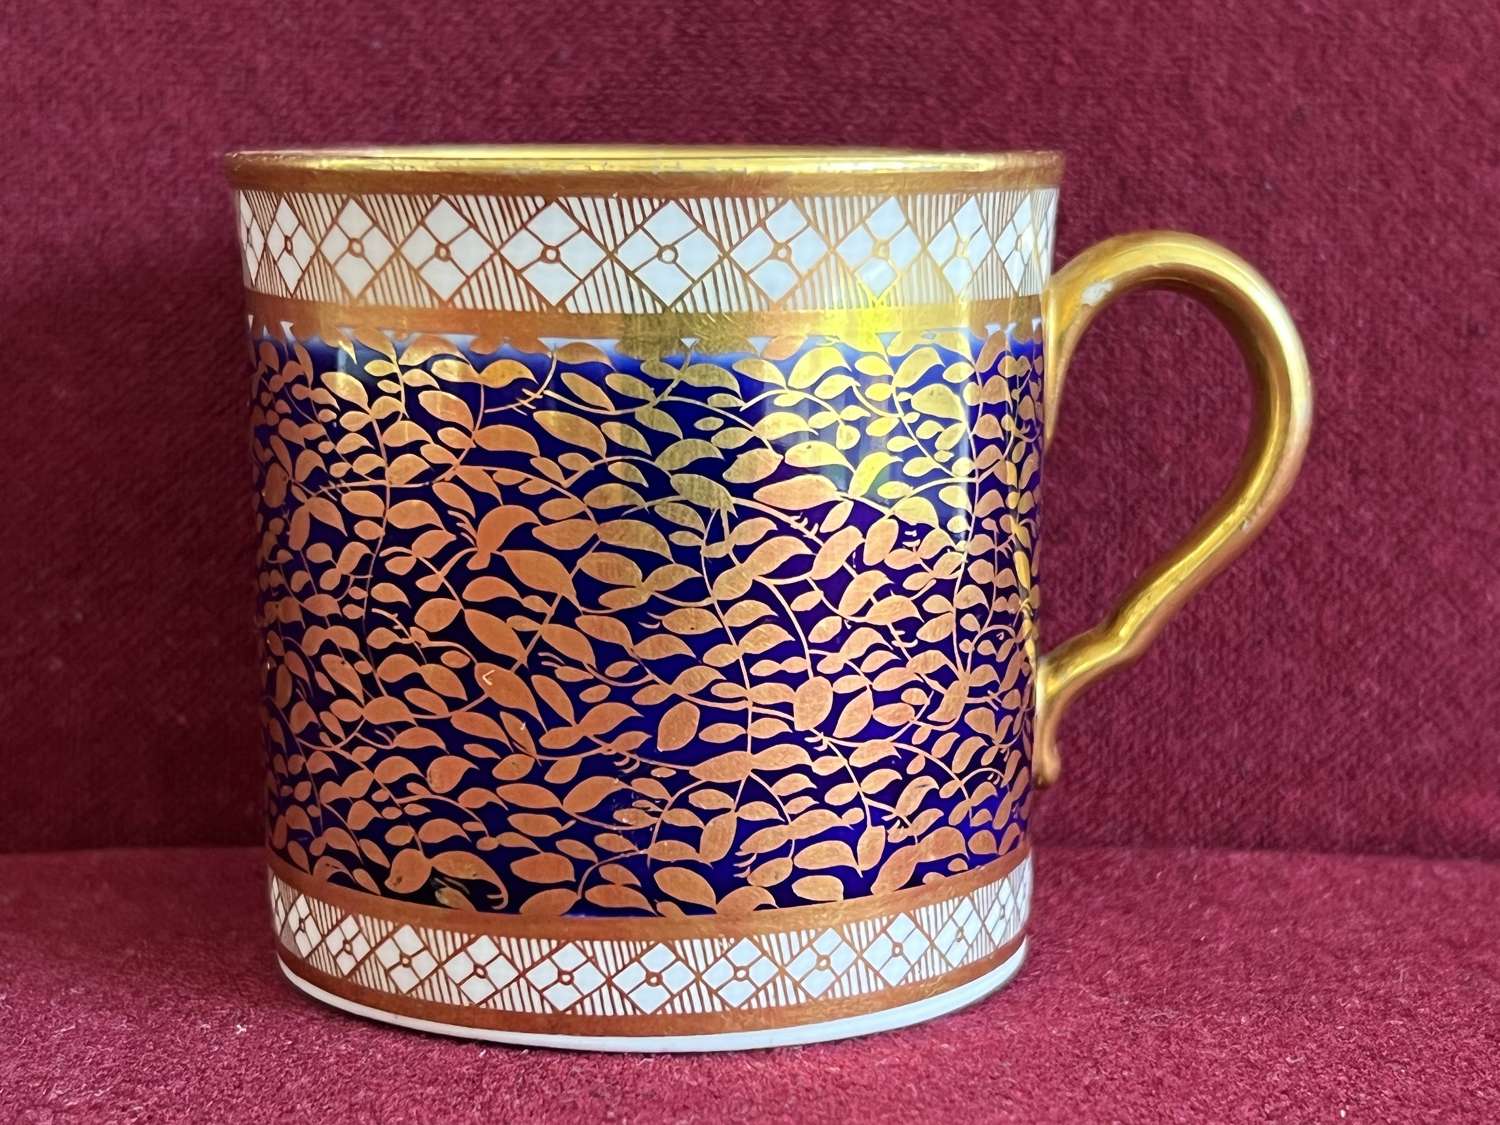 A Spode Porcelain Bute Shaped Coffee Can c.1805-1815 in pattern 2136